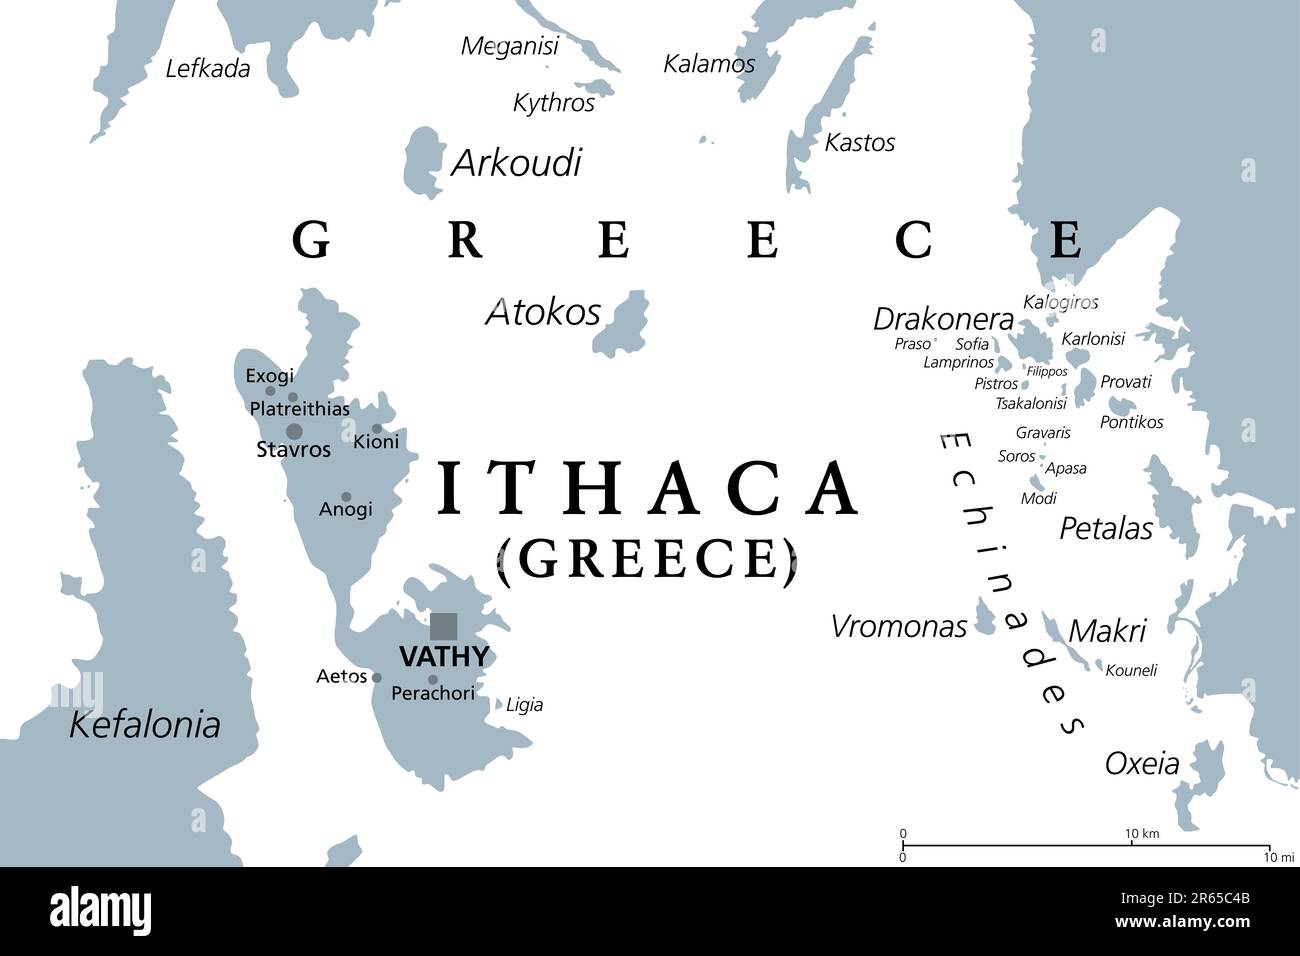 Ithaca, island and regional unit in Greece, gray political map. Part of the Ionian Islands. Ithaca, Arkoudi, Atokos, and some Echinades islands. Stock Photo